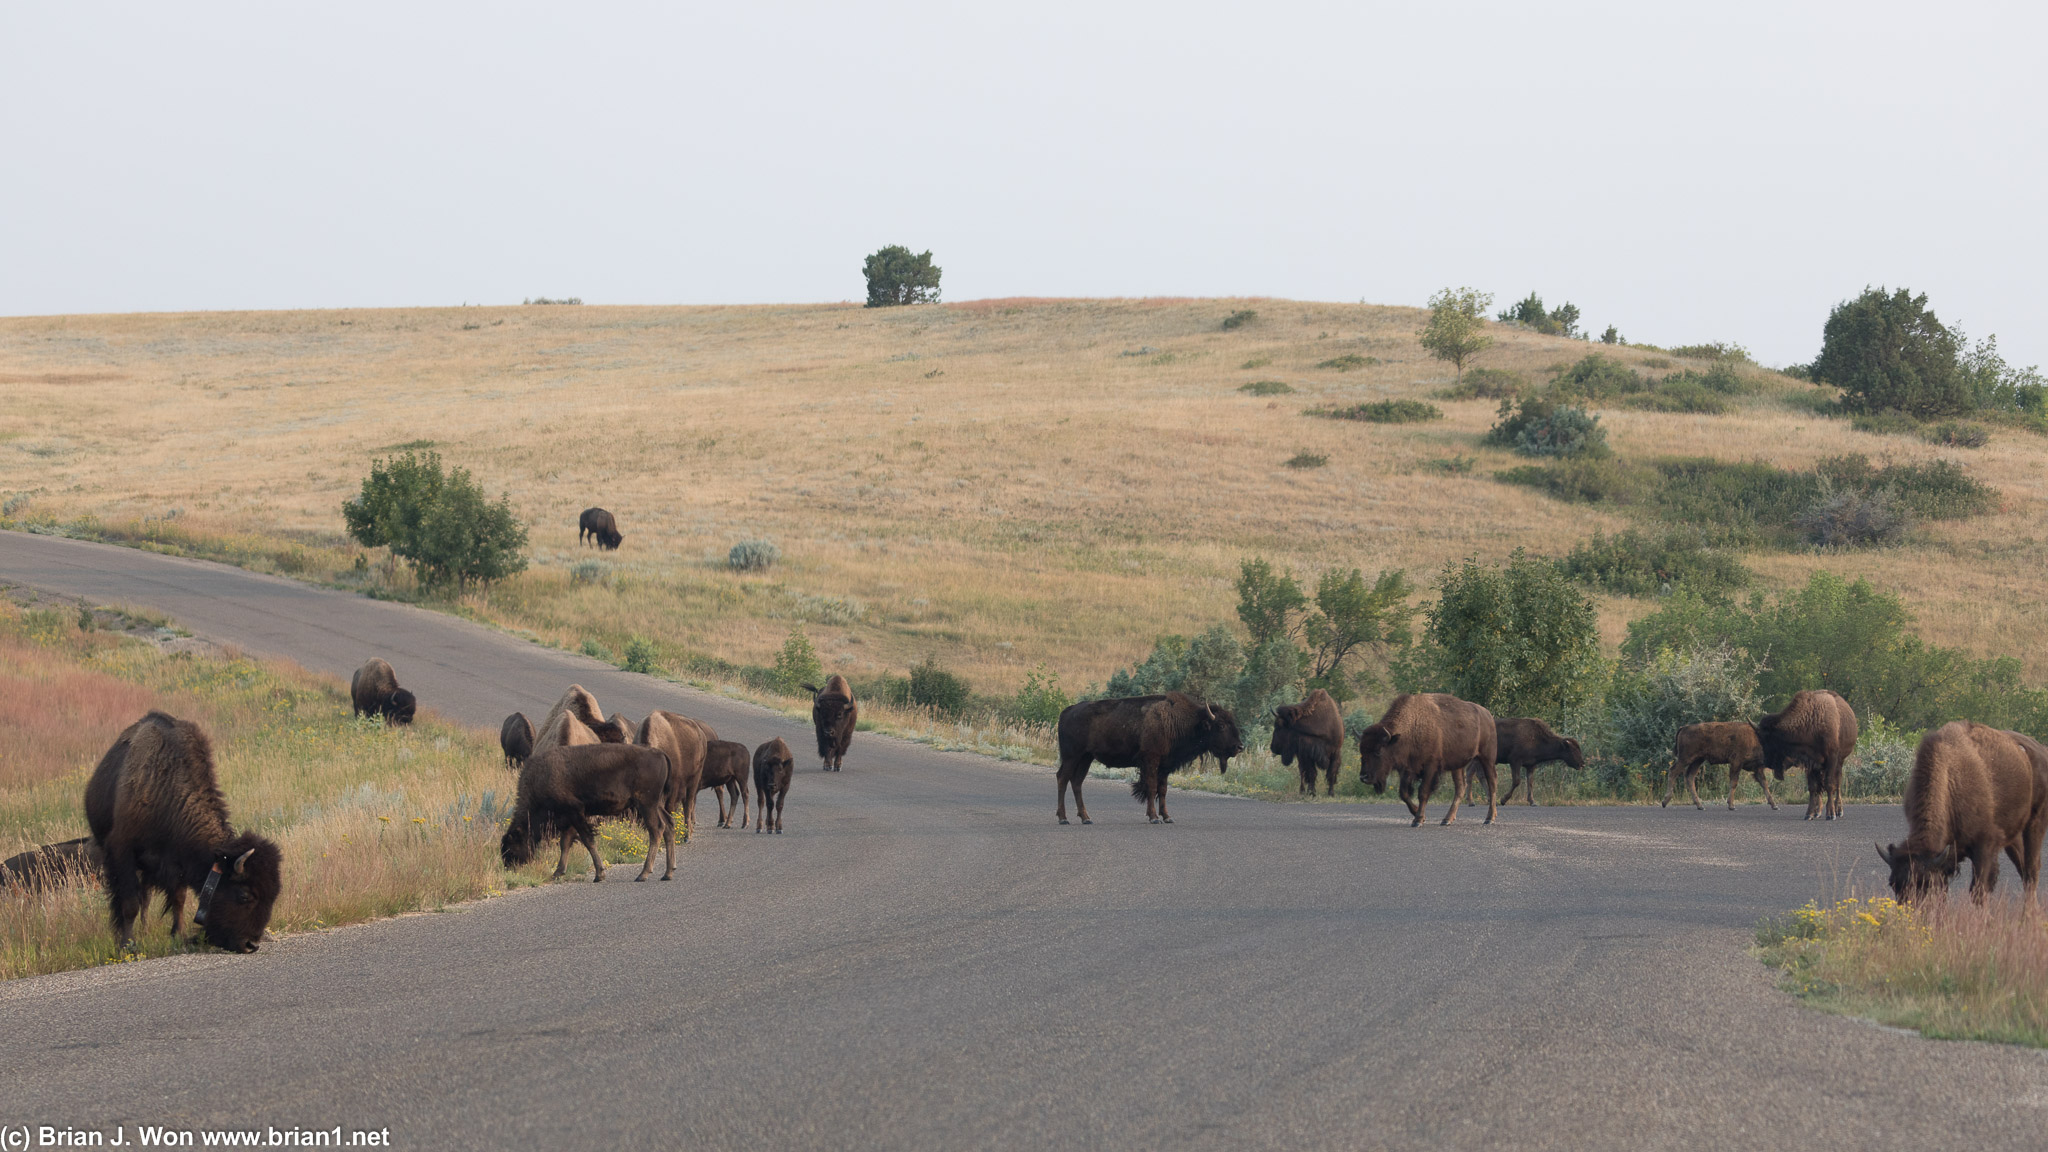 Where'd all these bison come from?